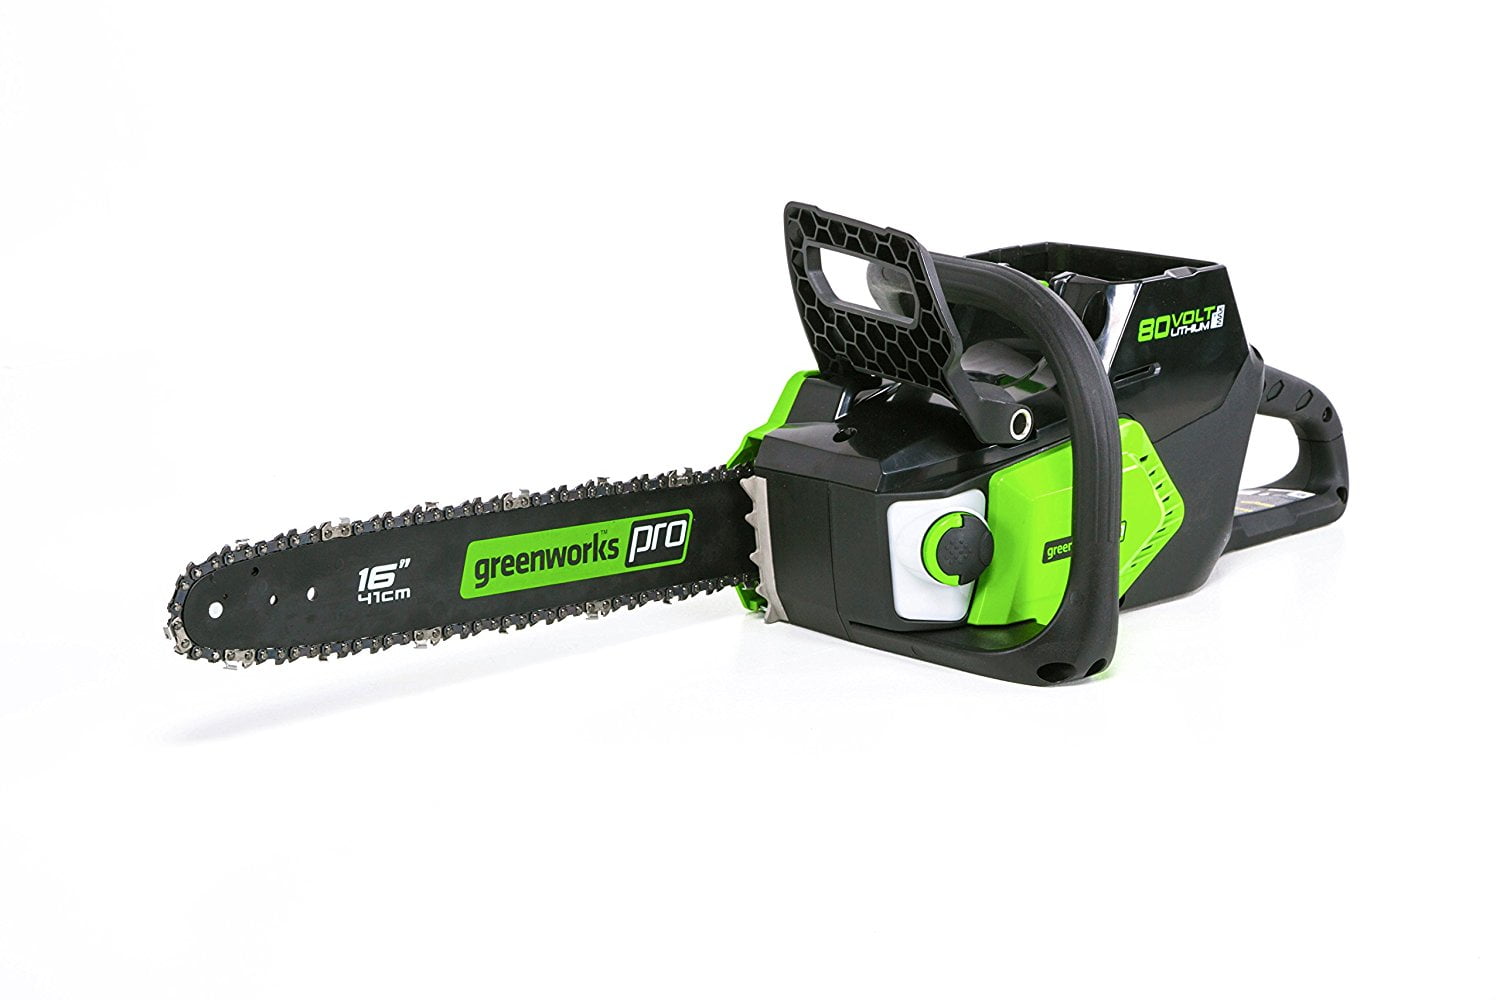  Pro 80V 16-inch Cordless Brushless Chainsaw, Battery Not .